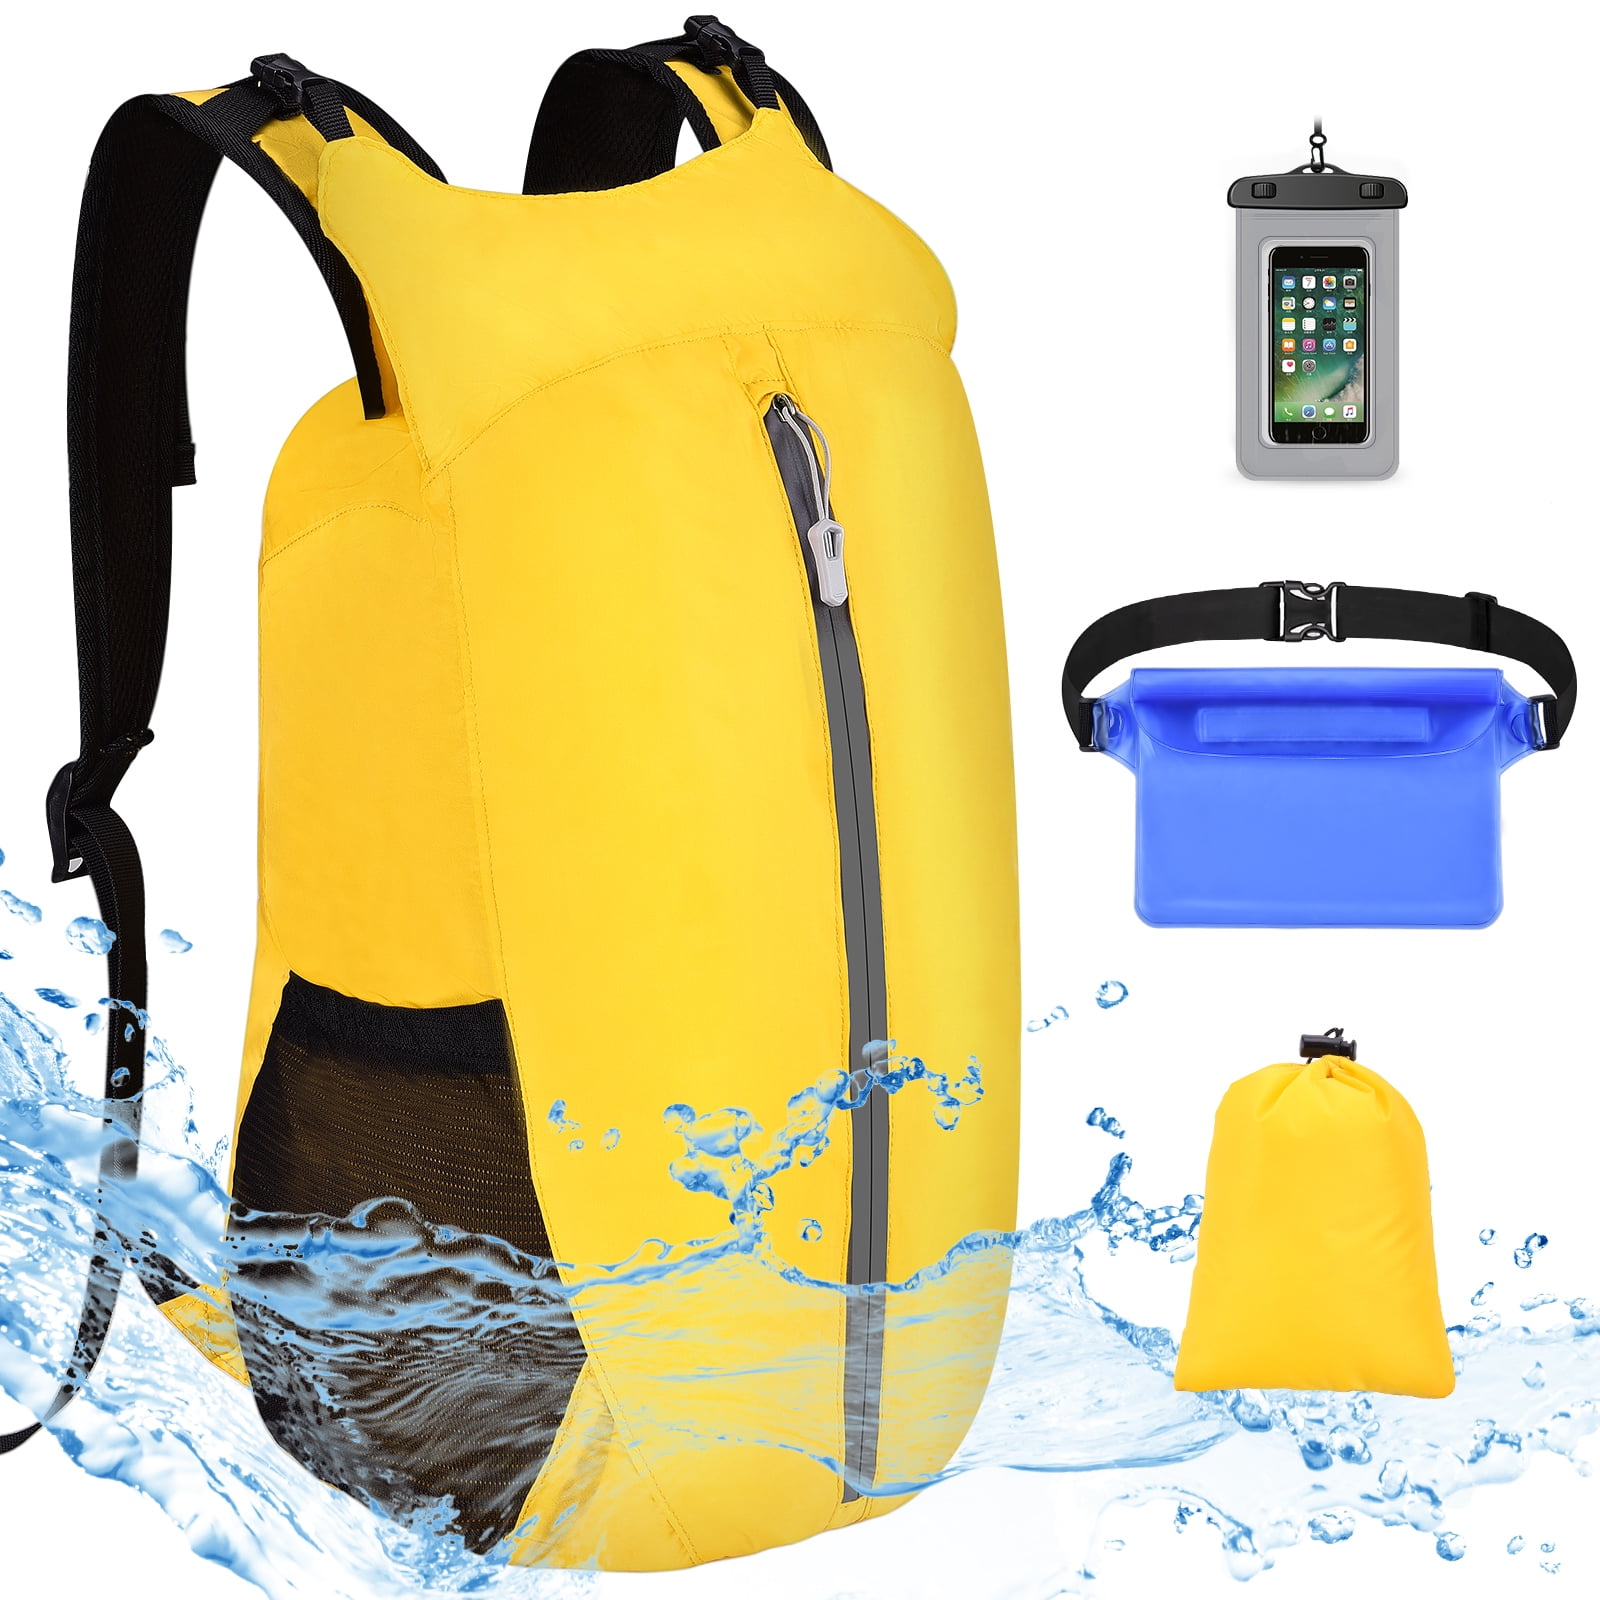 VBIGER Waterproof Dry Bag Backpack 20L Dry Storage Bag Waist Pouch & Phone Case Lightweight Foldable Floating Dry Sack for Kayaking Camping Swimming Skiing Hiking Fishing 